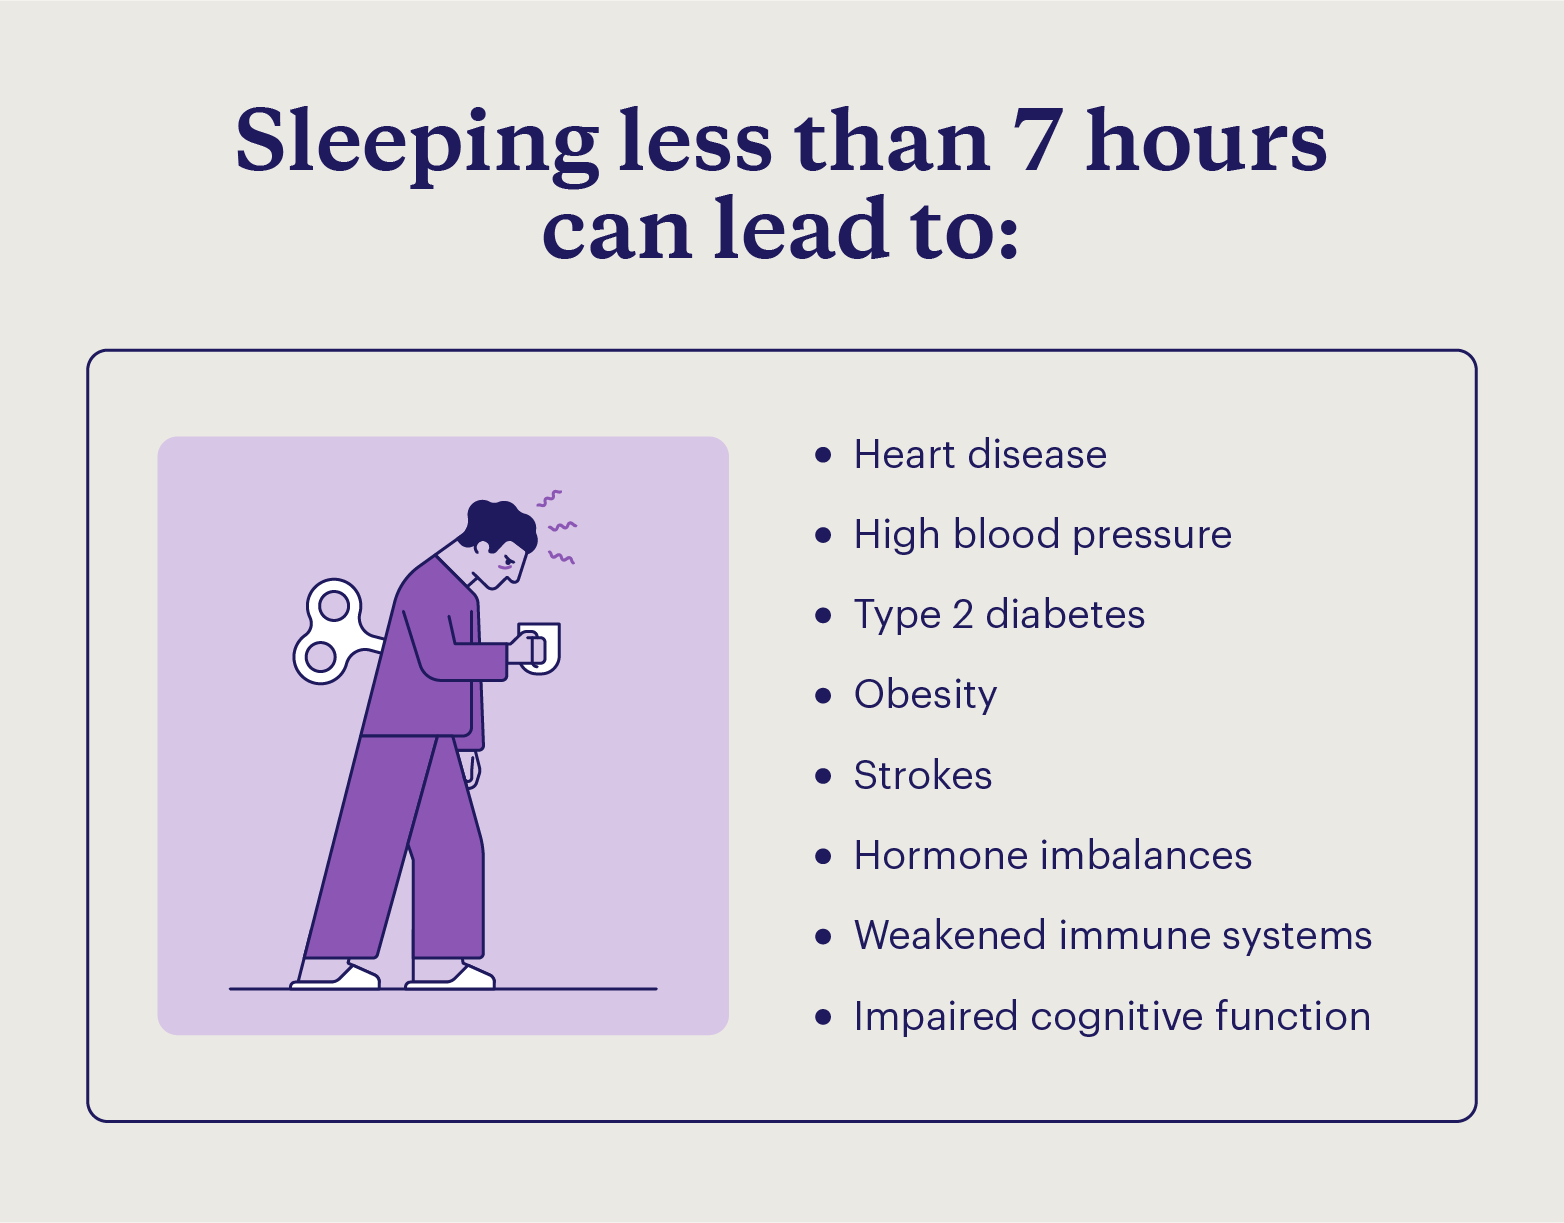 A graphic lists the facts about sleep related to the health impacts of sleeping less than 7 hours a night with an illustration of a tired man.